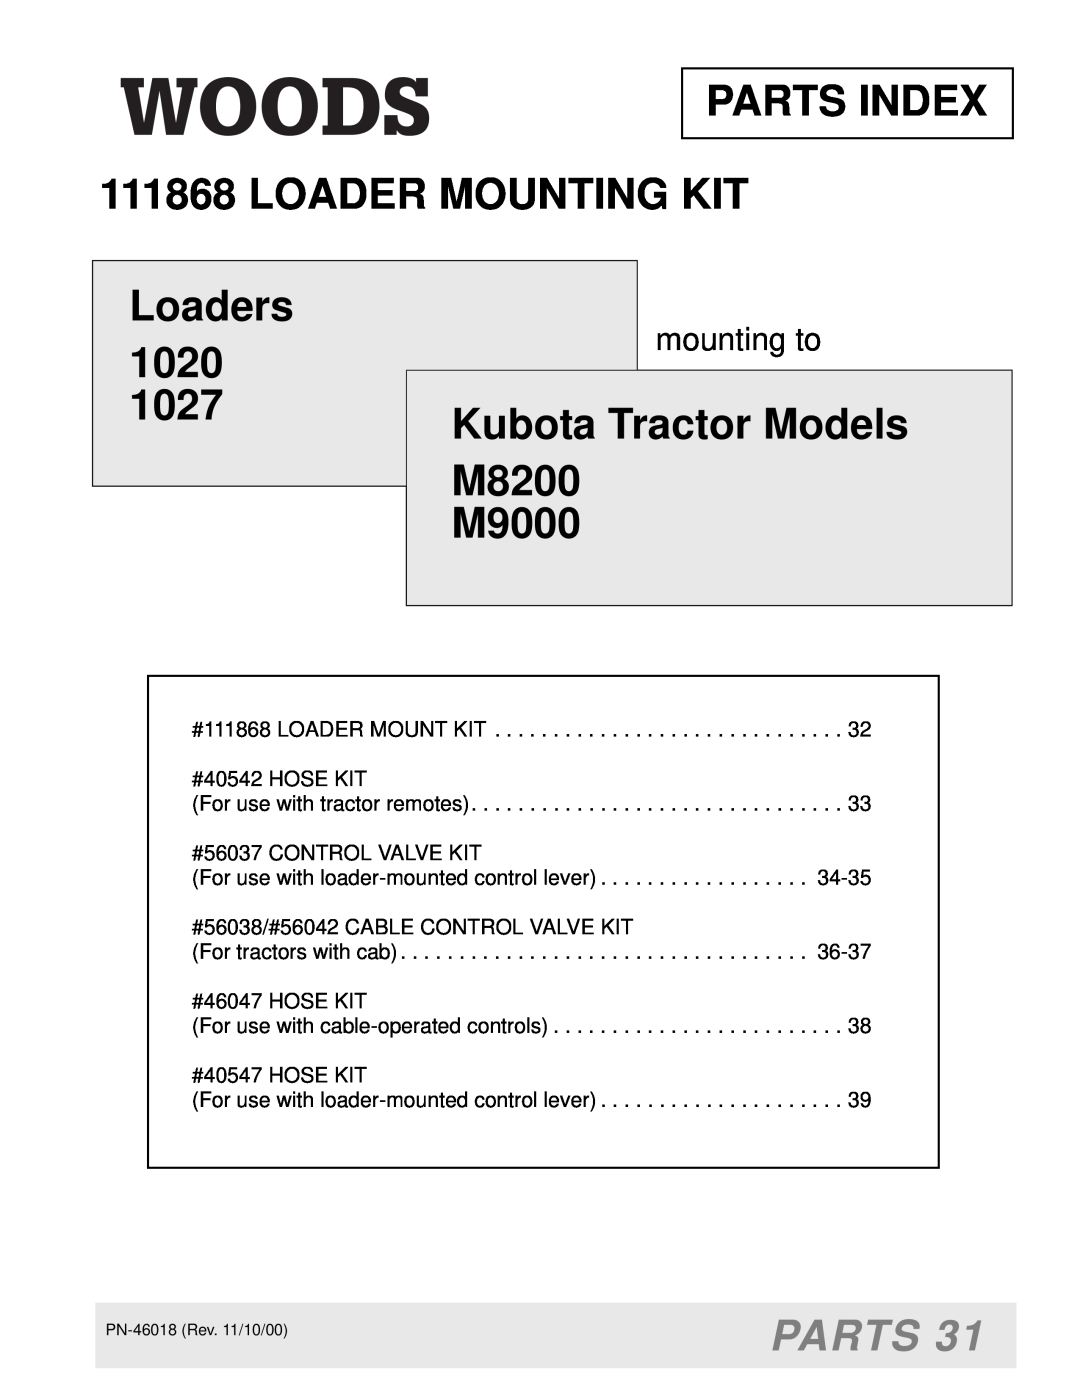 Woods Equipment M8200 manual PARTS INDEX 111868 LOADER MOUNTING KIT, Loaders 2551020 1027 260, Parts, mounting to 